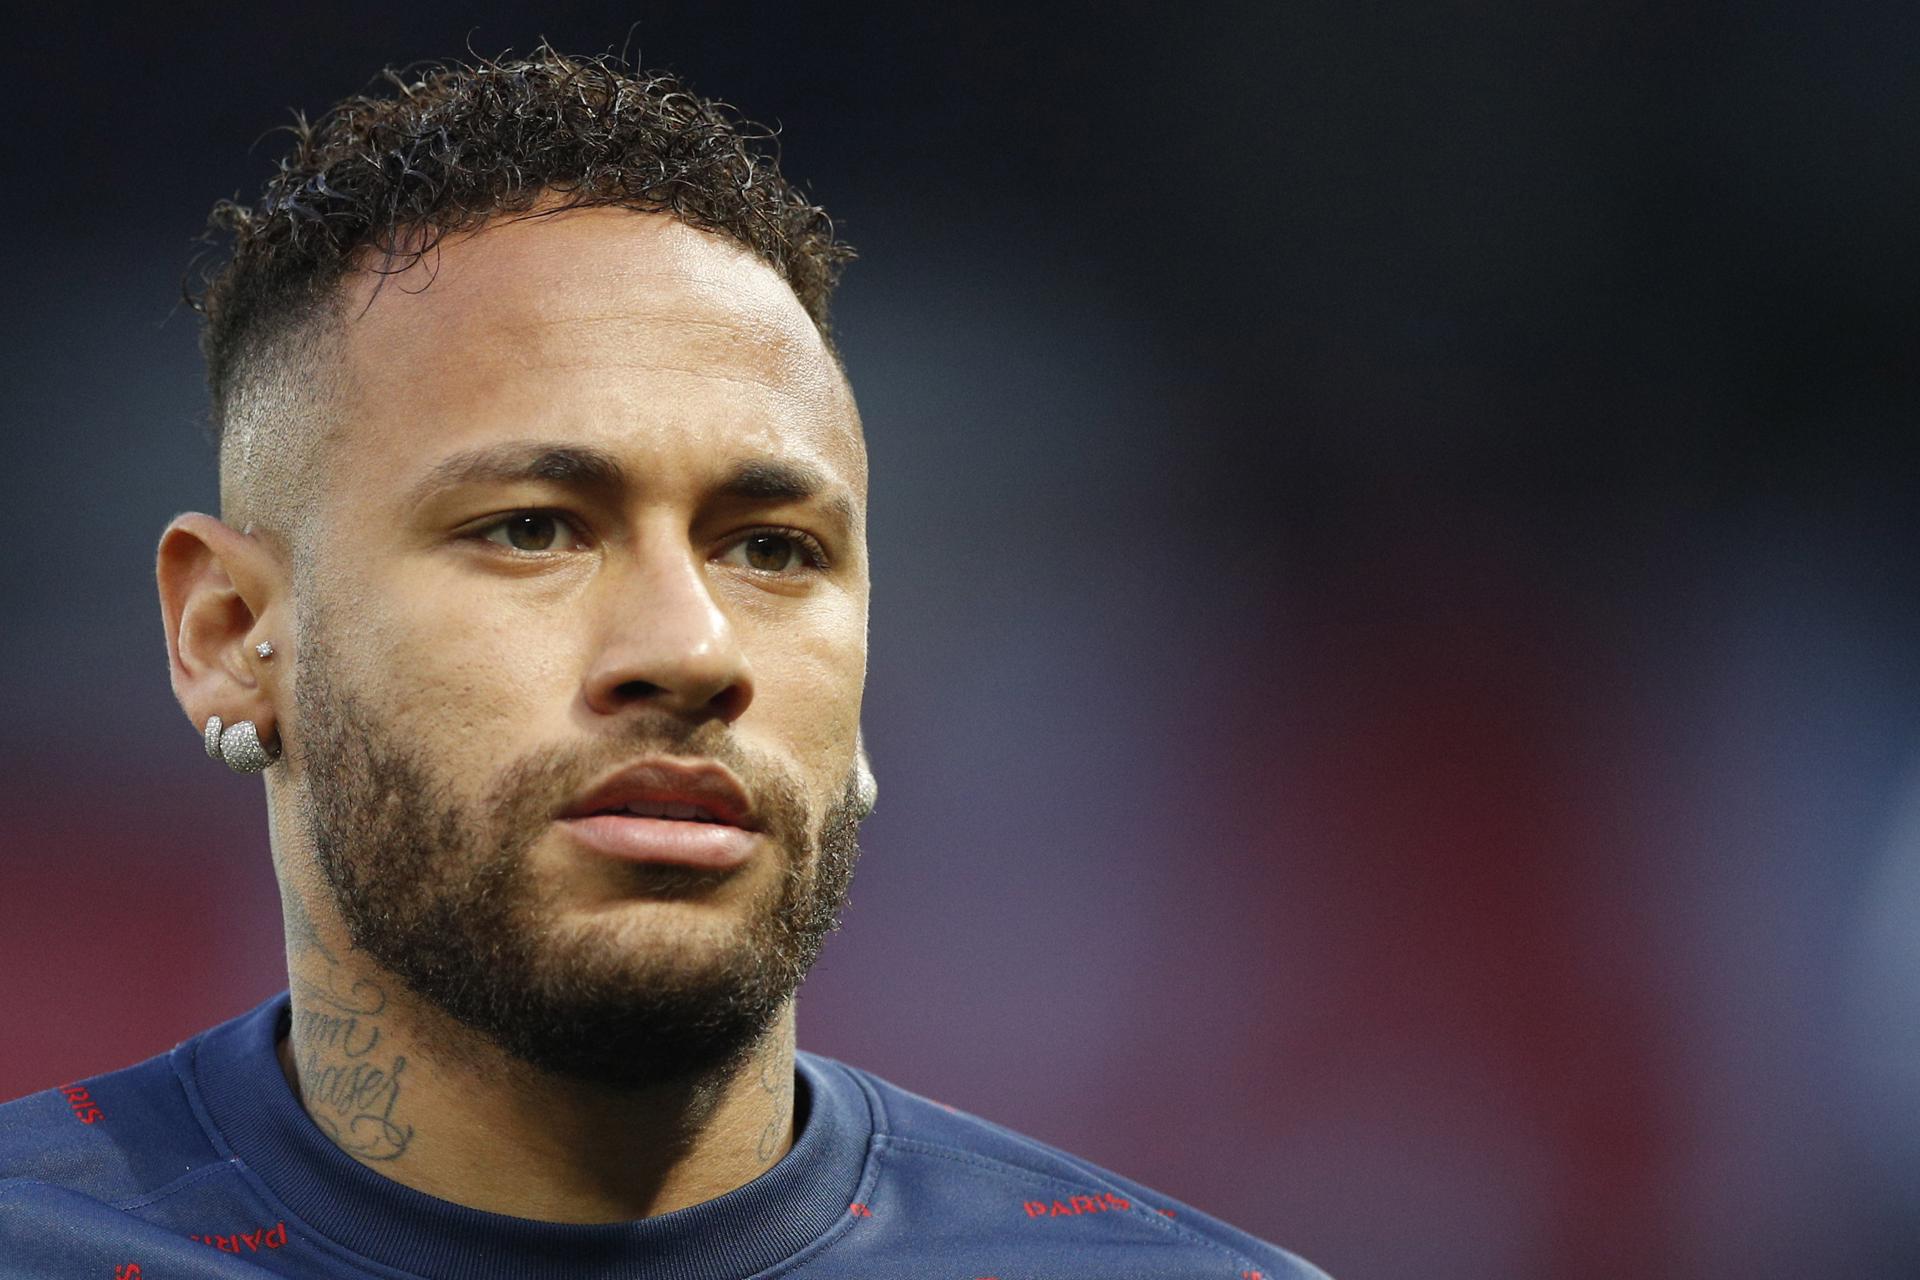 Neymar reveals surprising new hairstyle as he recovers from ACL injury